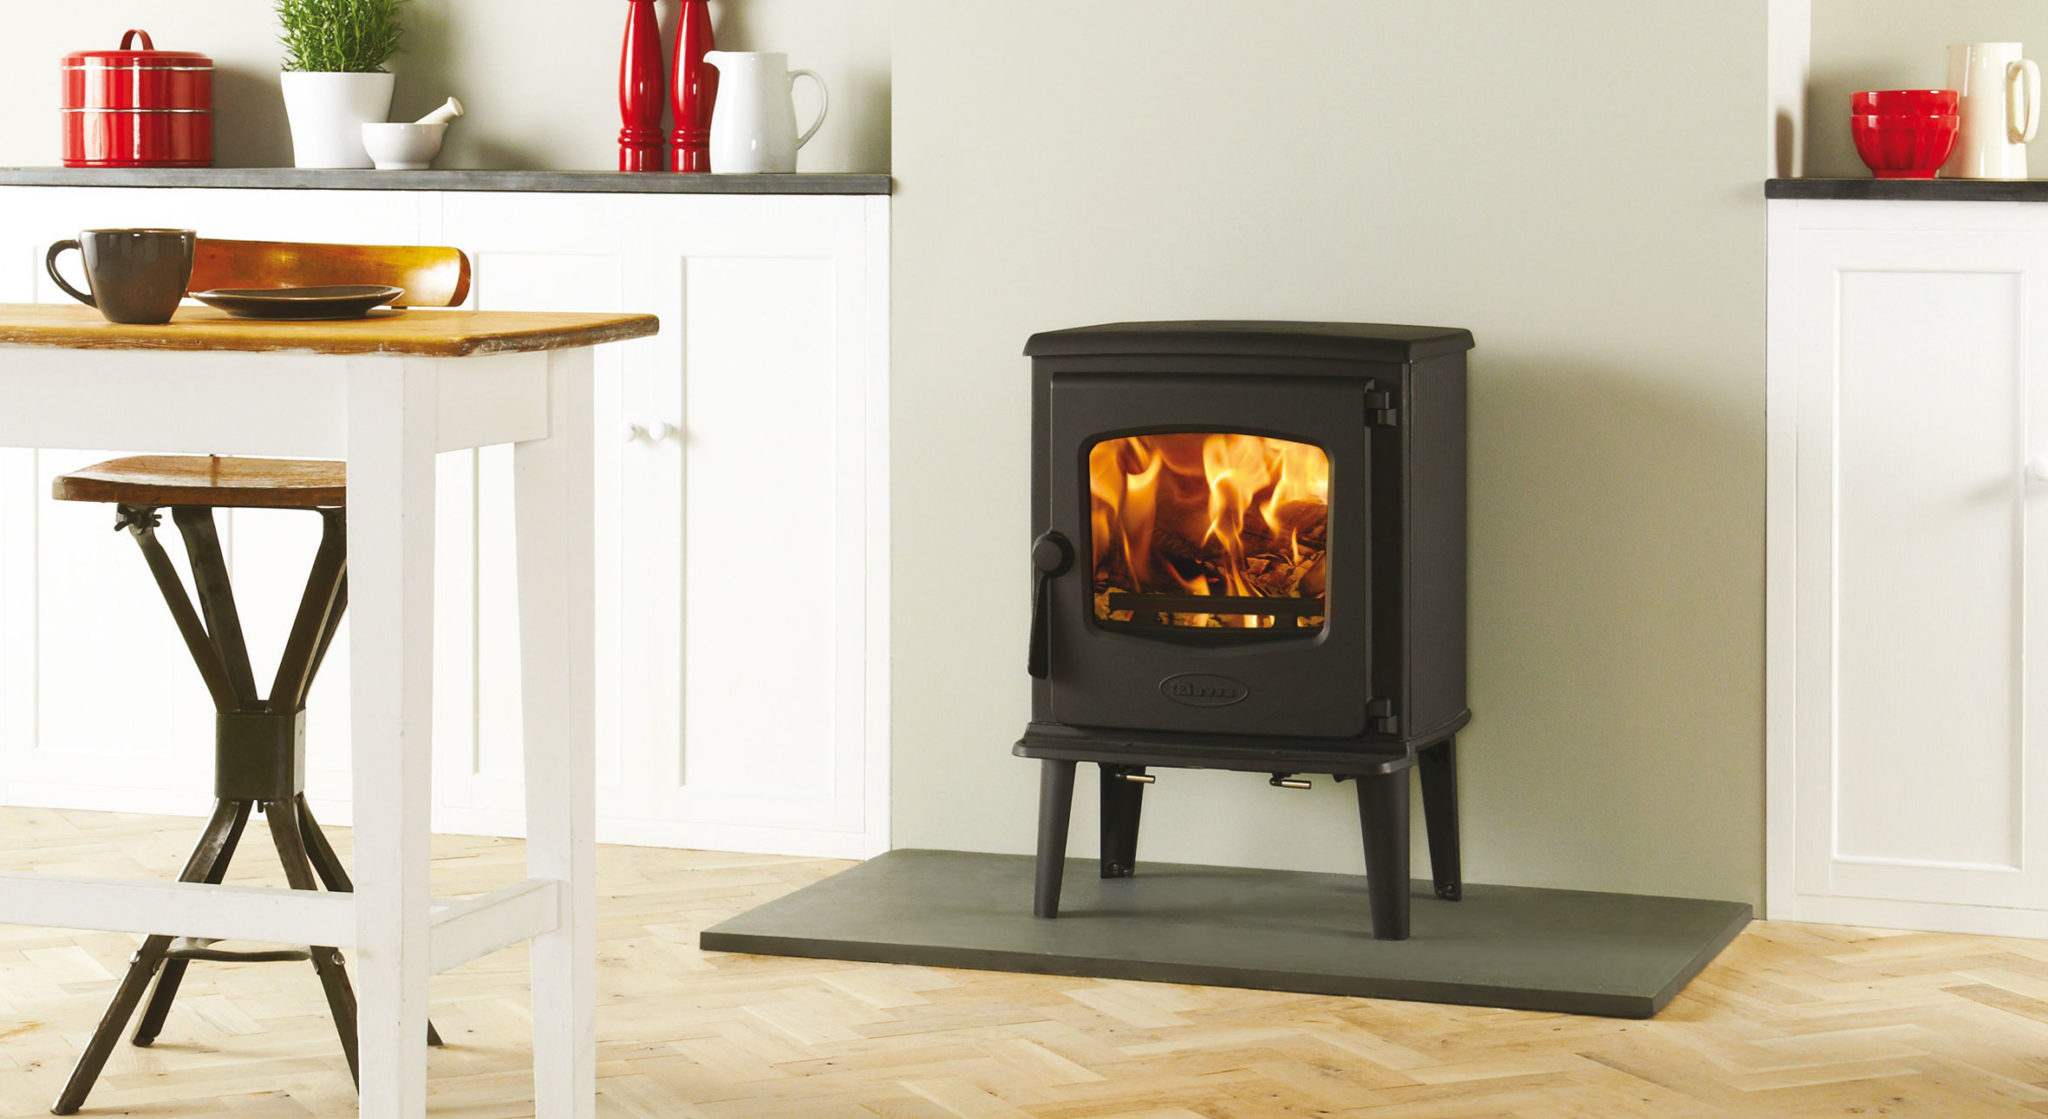 Why choose a Wood Burning Stove?